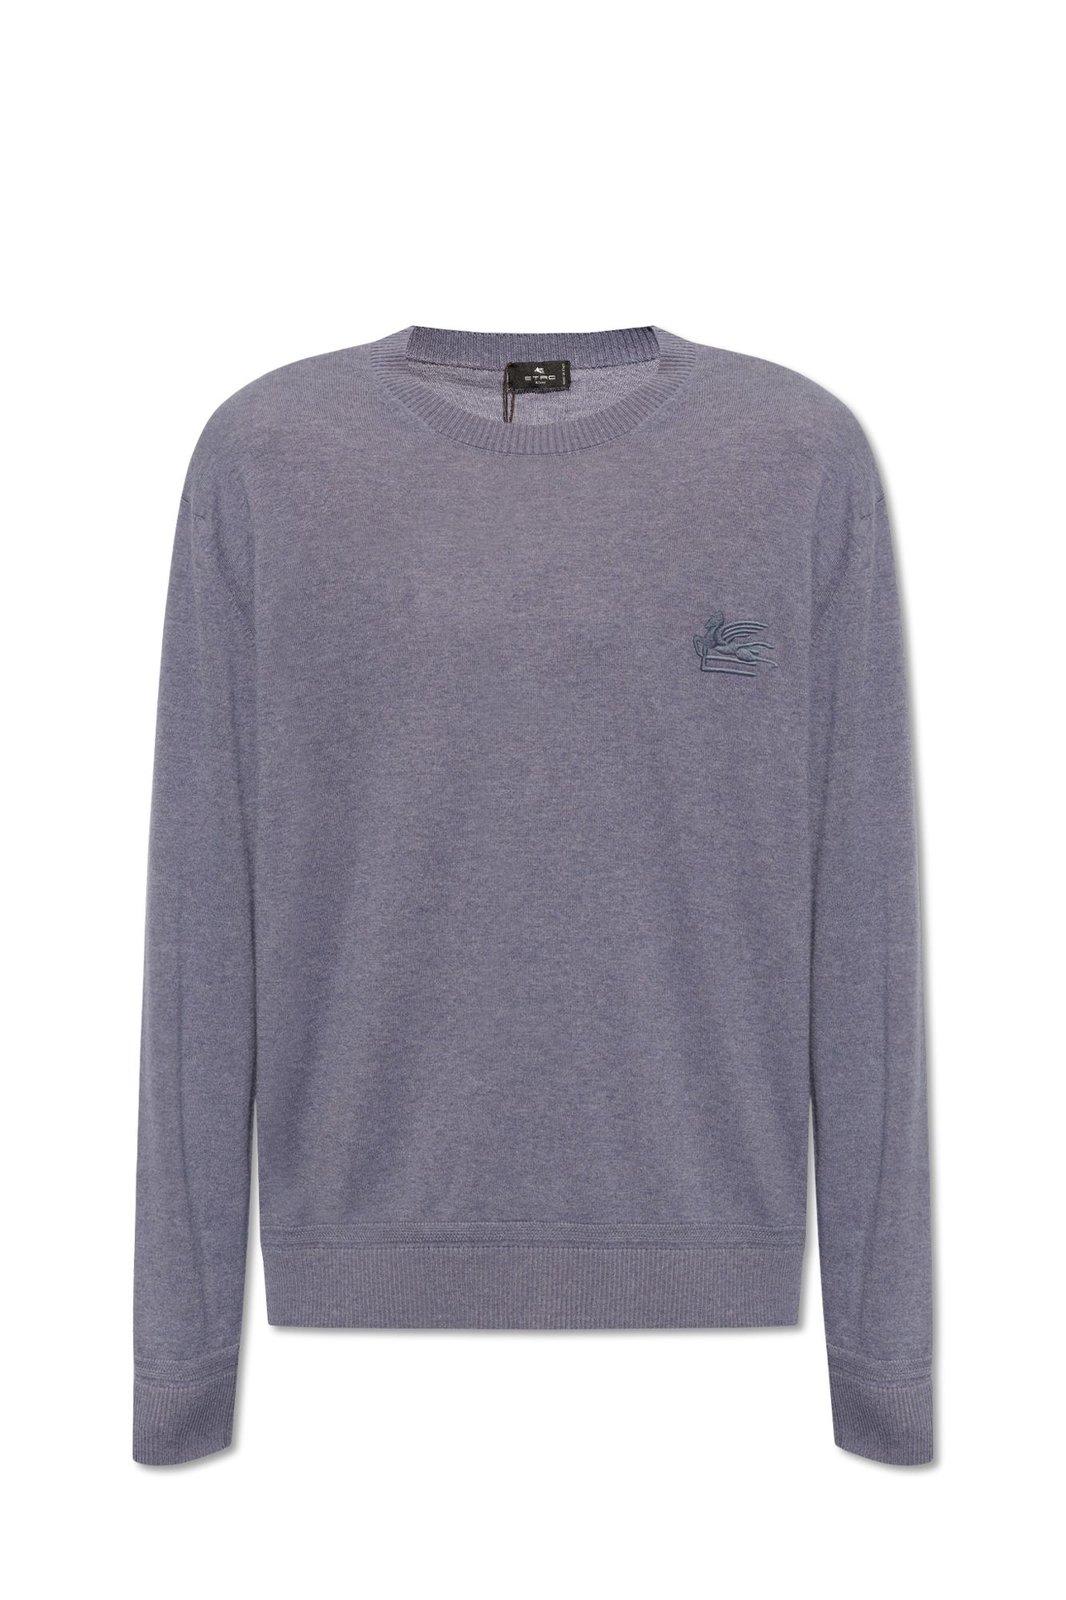 Pegaso Embroidered Knit Jumper